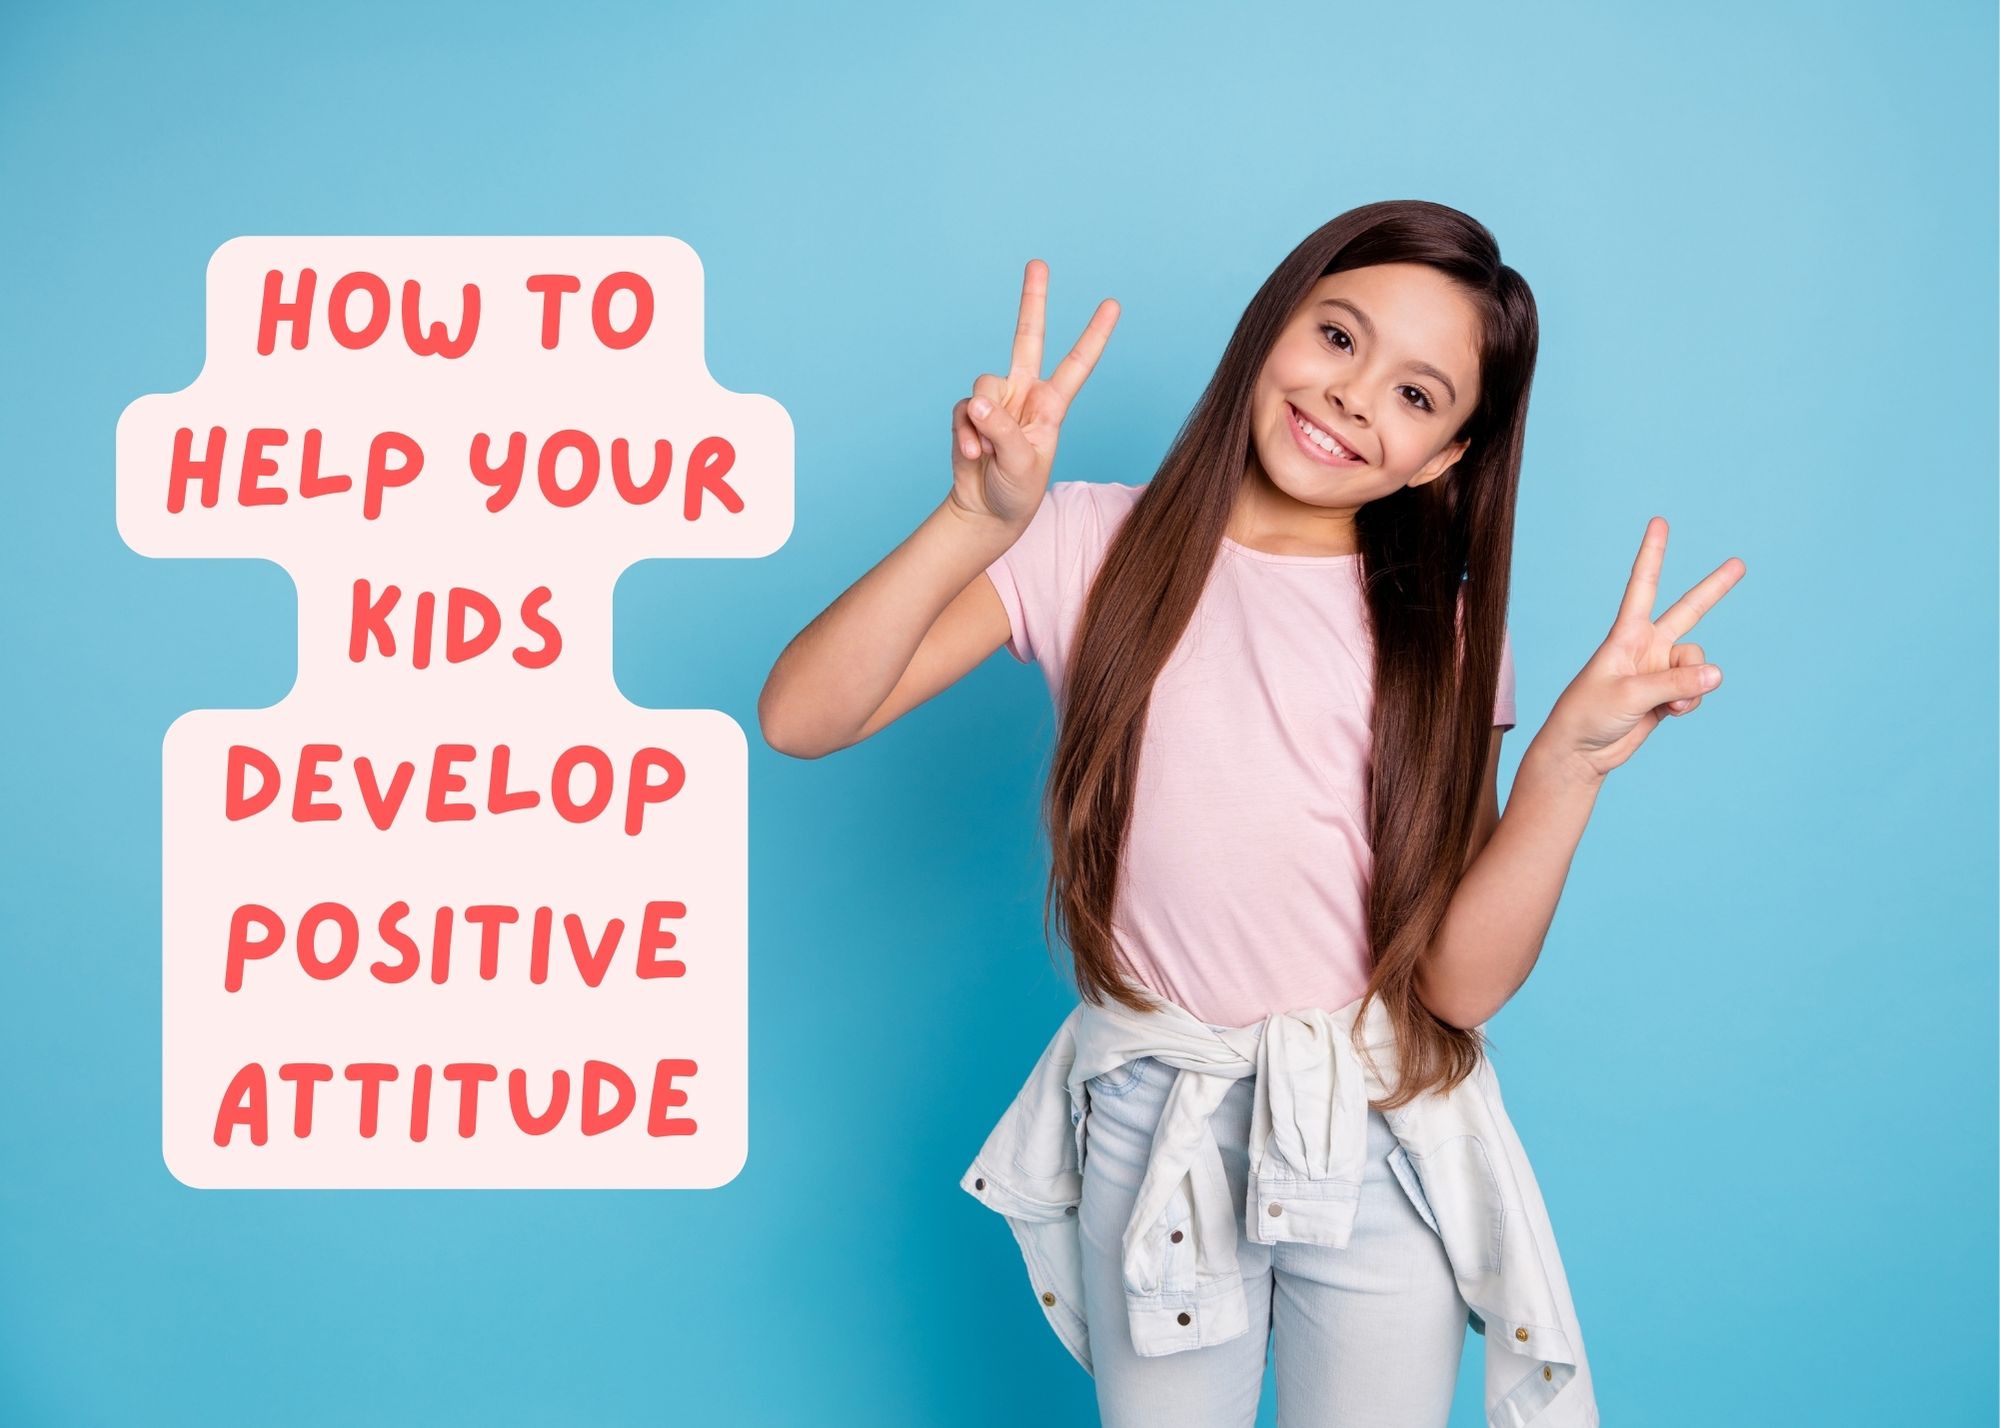 How to Help Your Kids Develop Positive Attitude